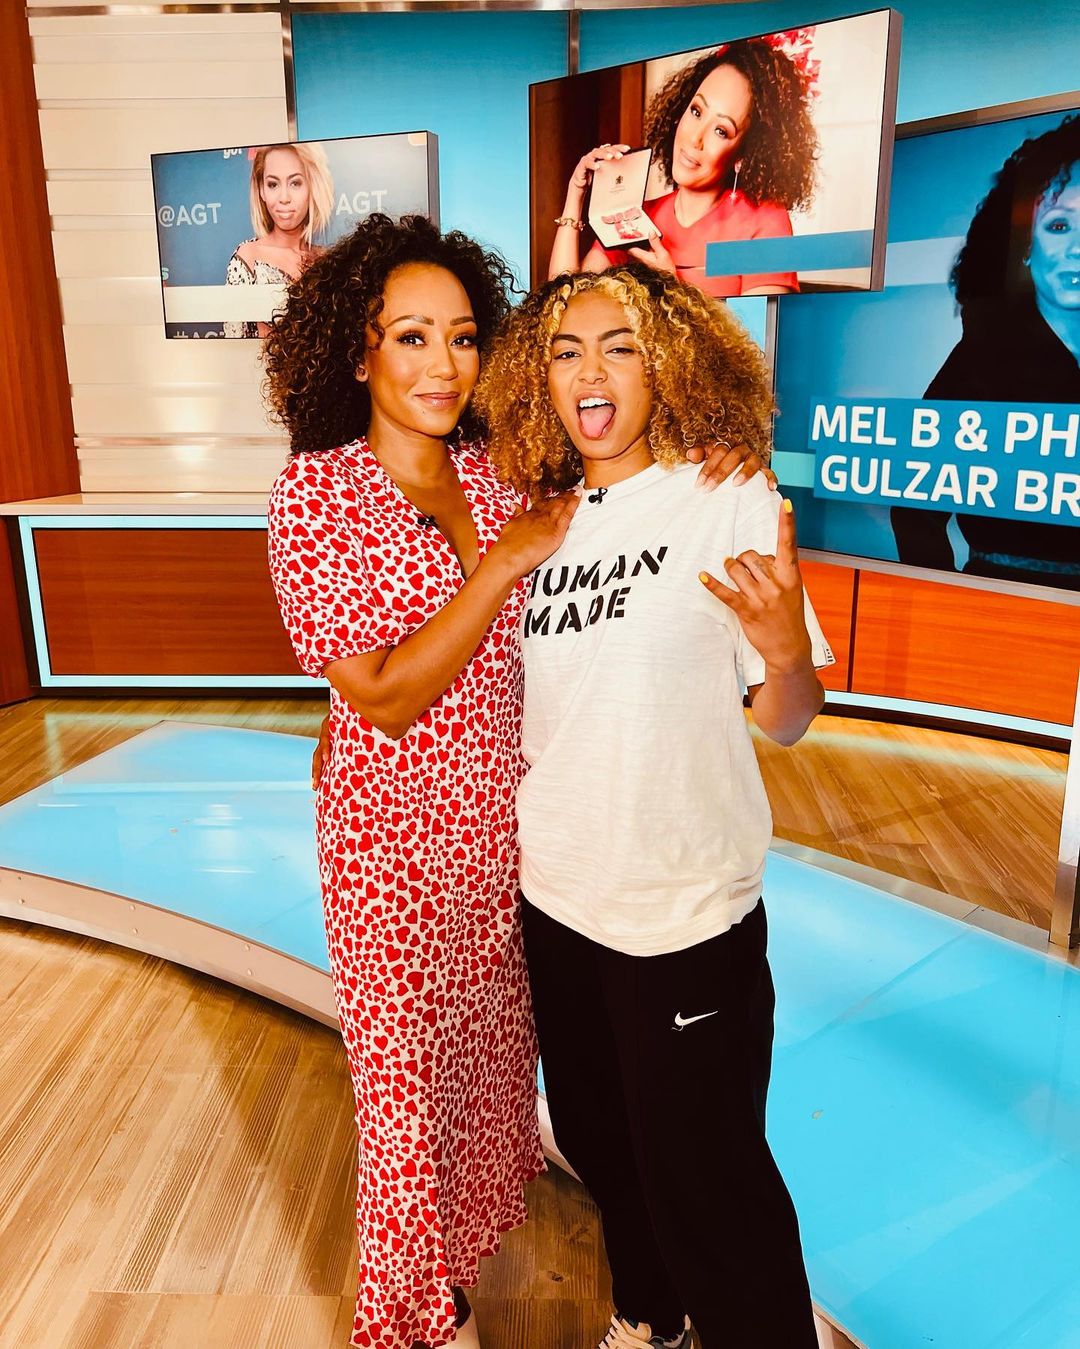 Had a little bit of fun this morning on @gmb with my daughter she is just “too cool for school”????????✌????tonight is the night @phoenixisphoenix I will be cheering you on baby girl on @thegamestv finale